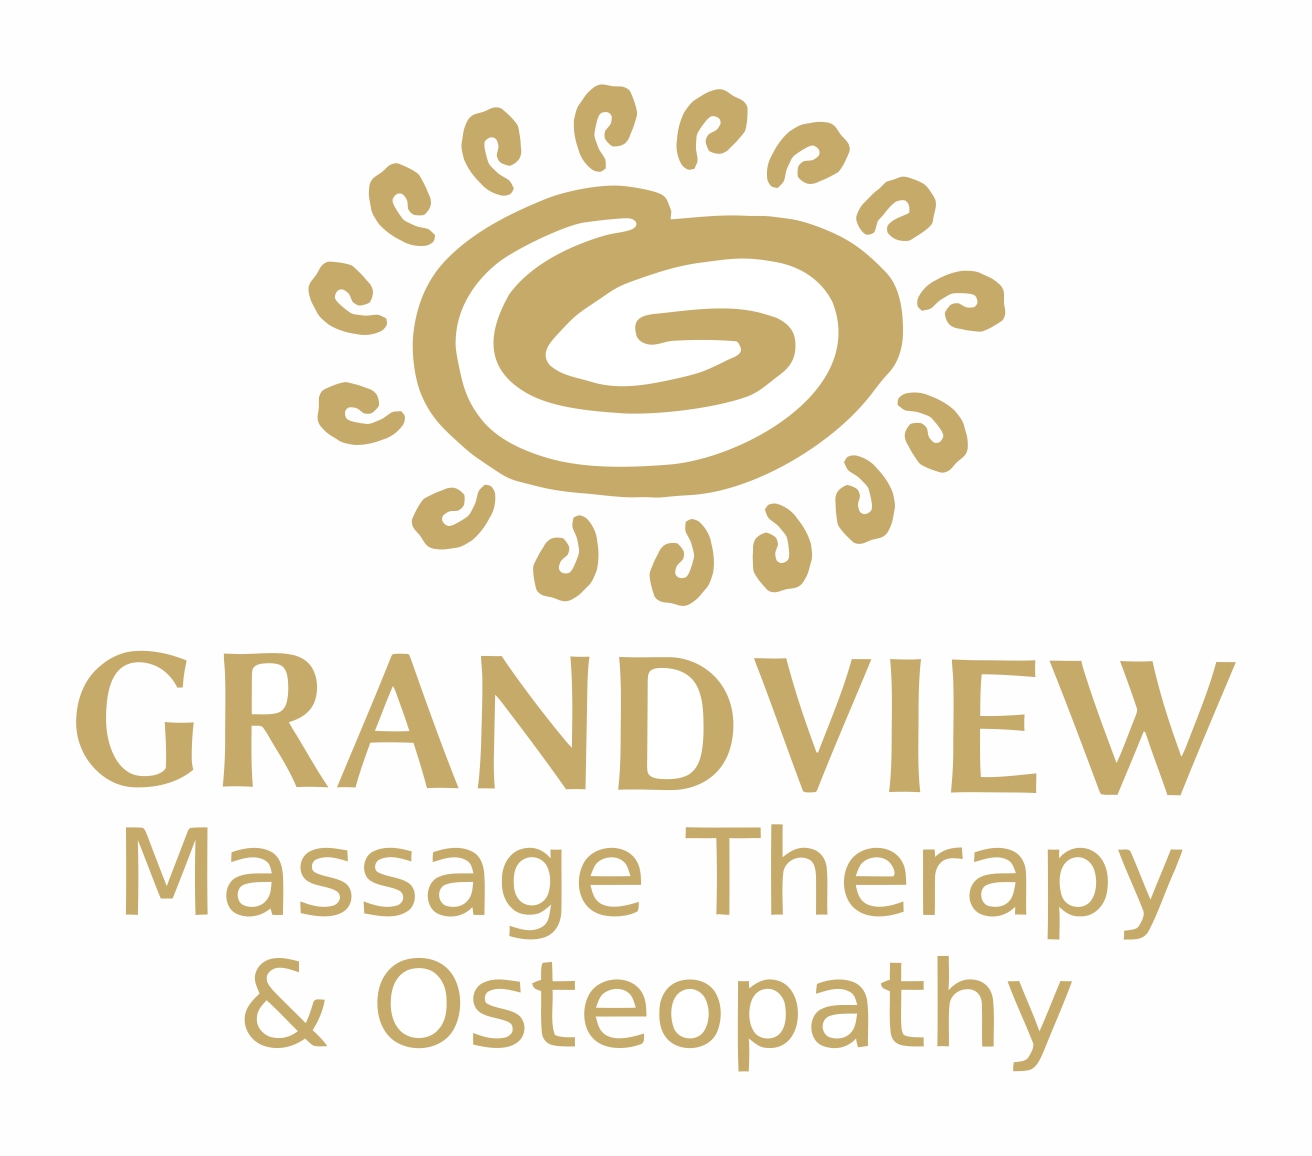 Grandview Massage Therapy & Osteopathy